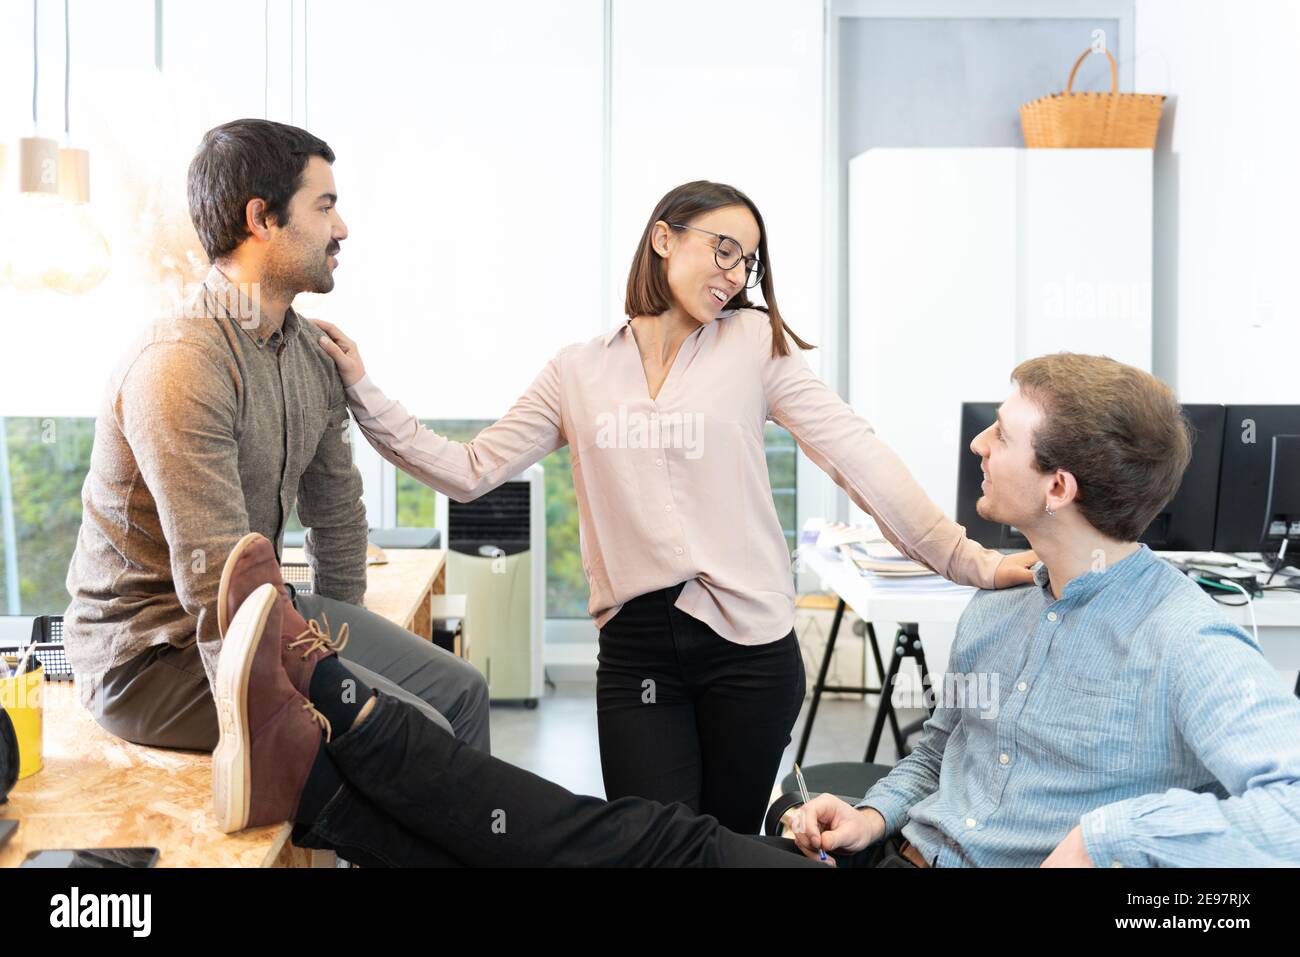 Three diverse young coworkers chatting relaxed at the office. Stock Photo